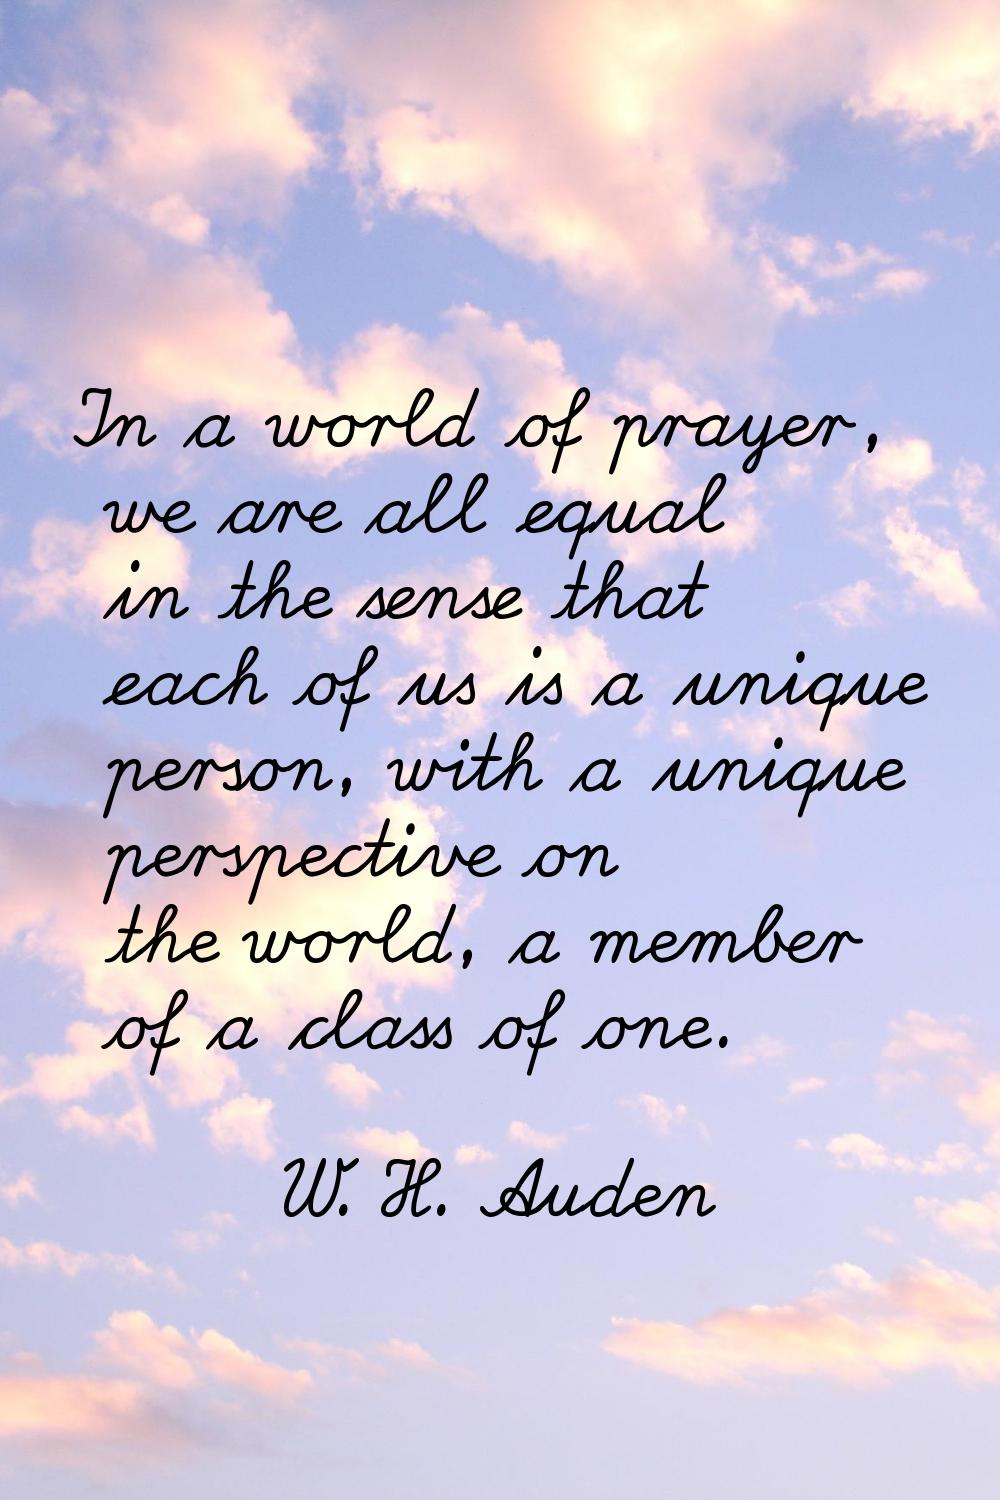 In a world of prayer, we are all equal in the sense that each of us is a unique person, with a uniq